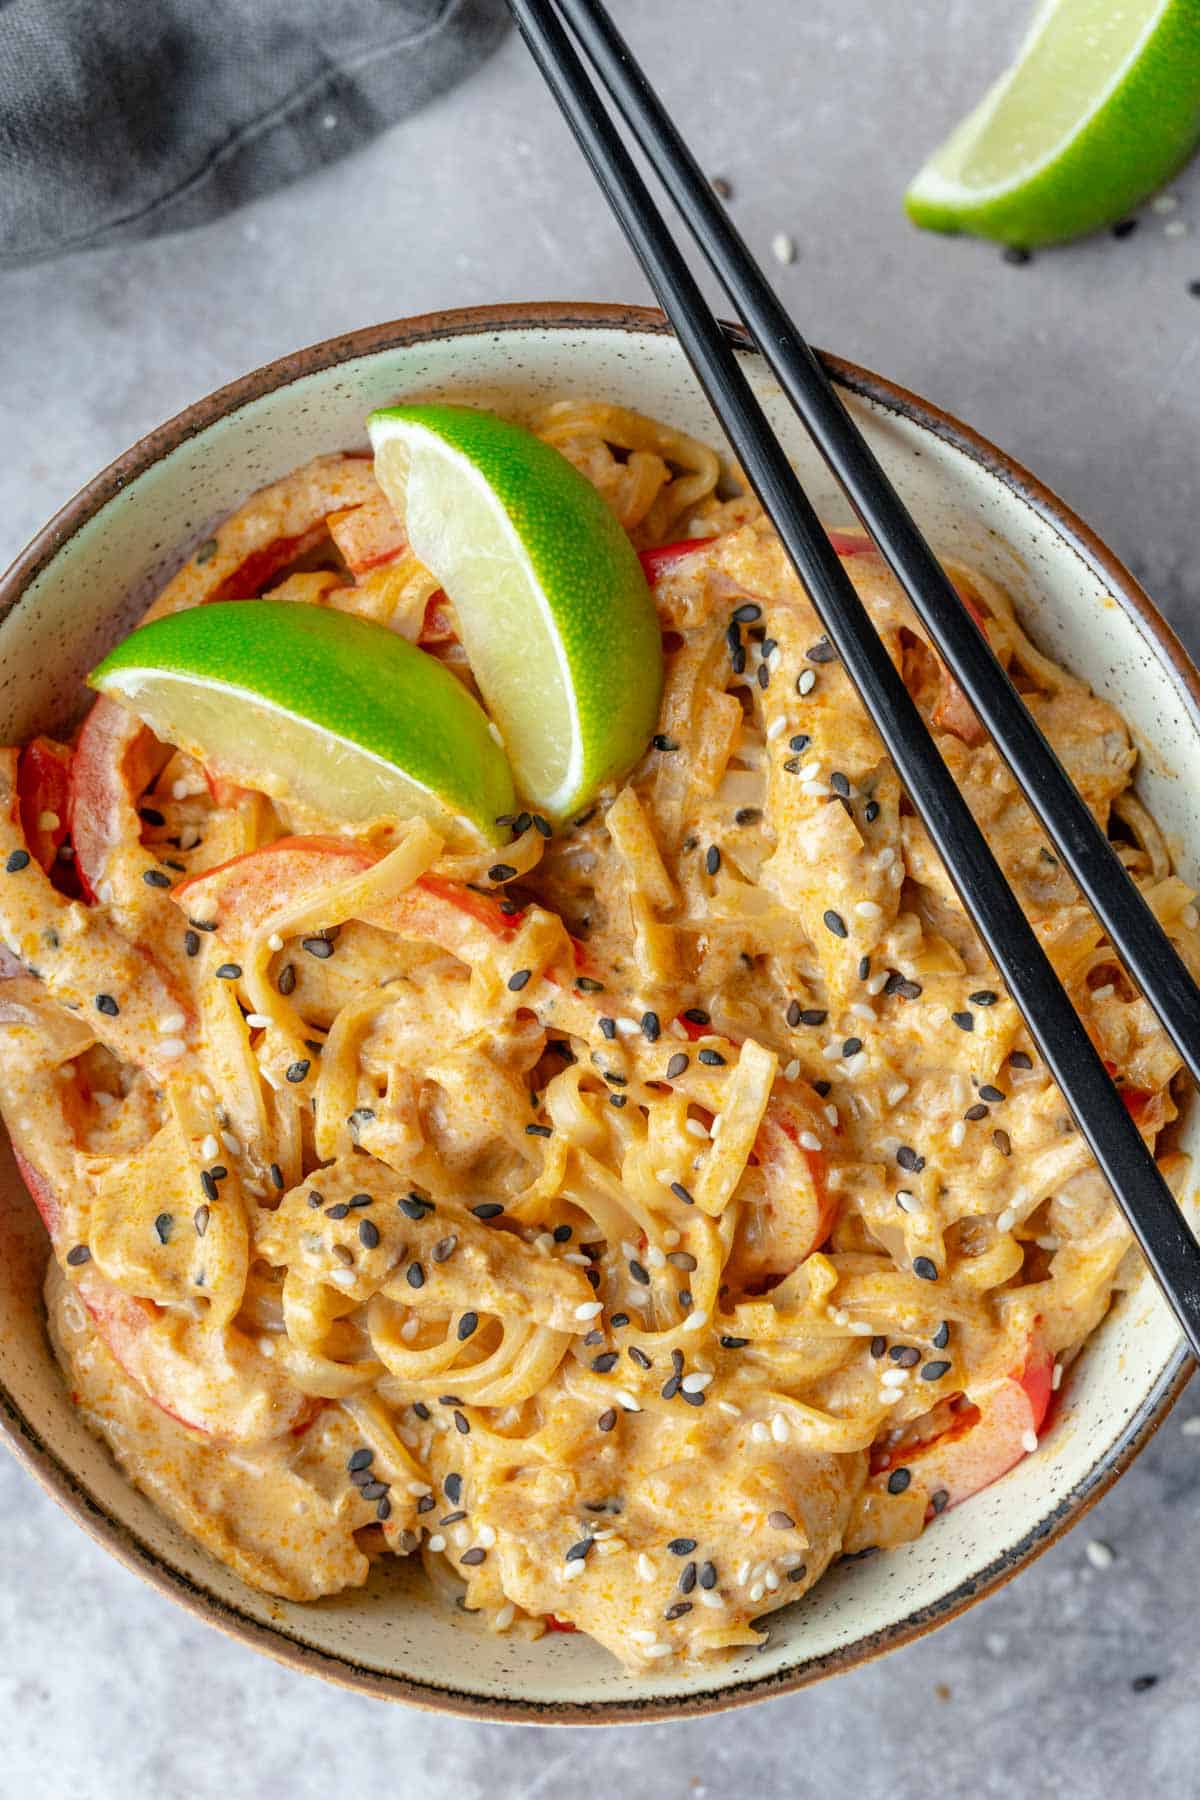 These Thai Red Curry Chicken Noodles are the perfect easy dinner recipe that will be ready in 15 minutes! This bowl of noodles is huge on flavor and is packed with bites of tender chicken, coconut milk, rice noodles, spices, and lime juice. Comforting, filling, and gluten free!